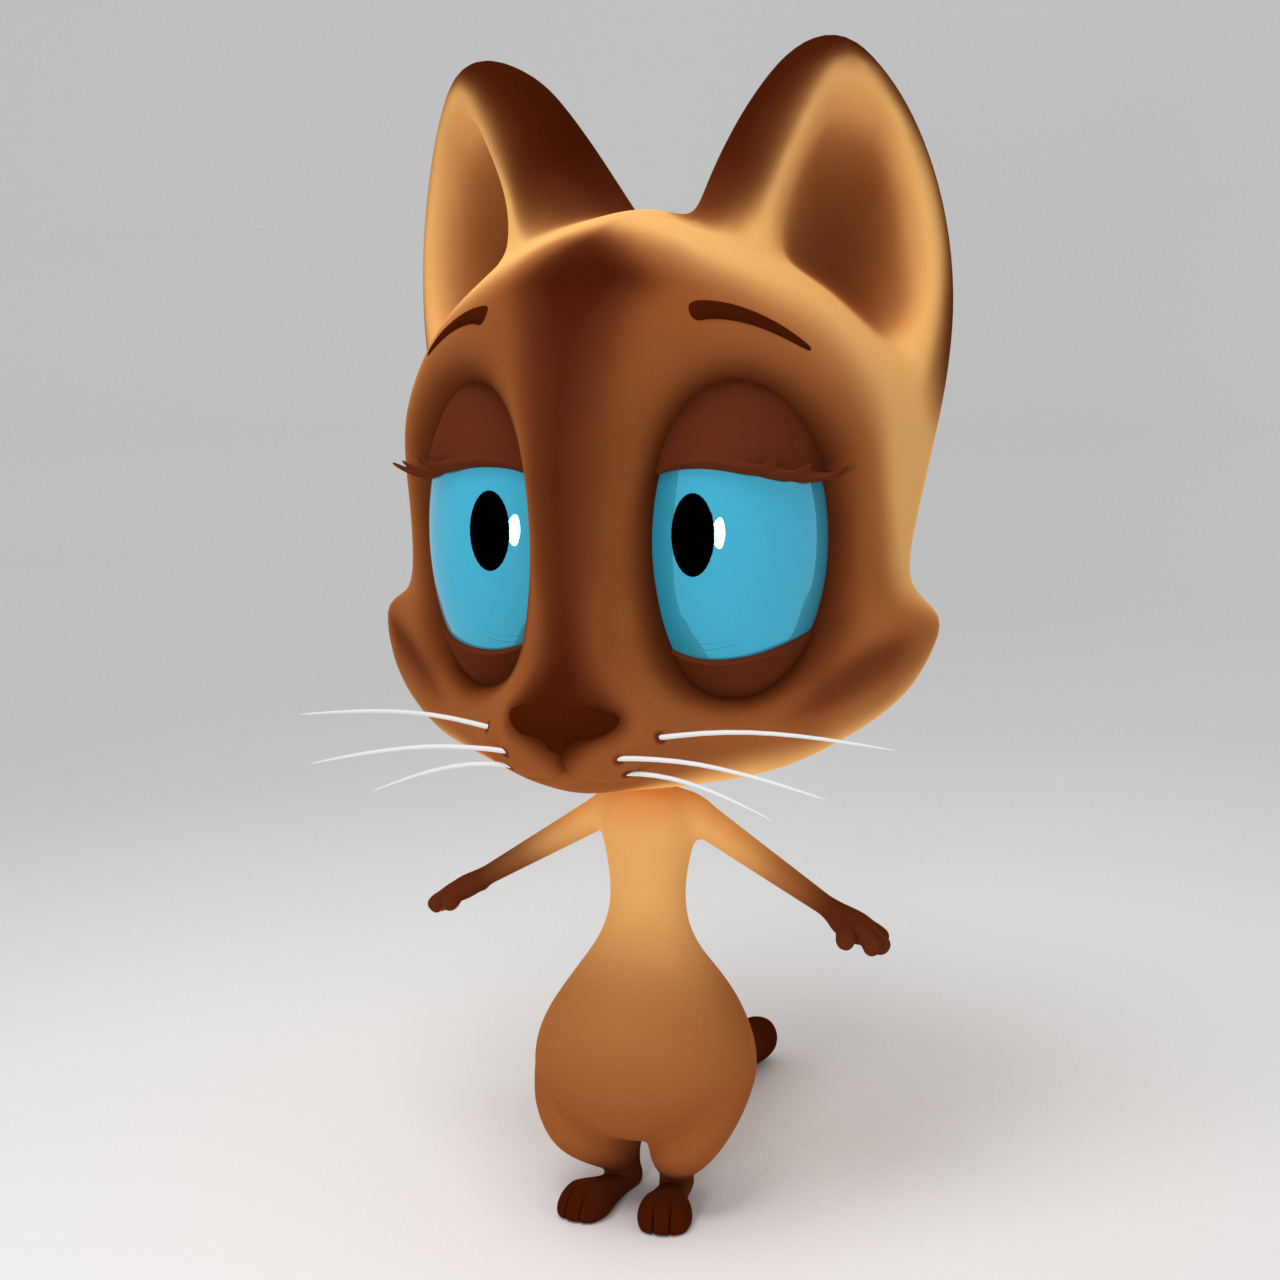 Stylized cartoon Cat rigged - Animation and Rigging - Blender Artists  Community